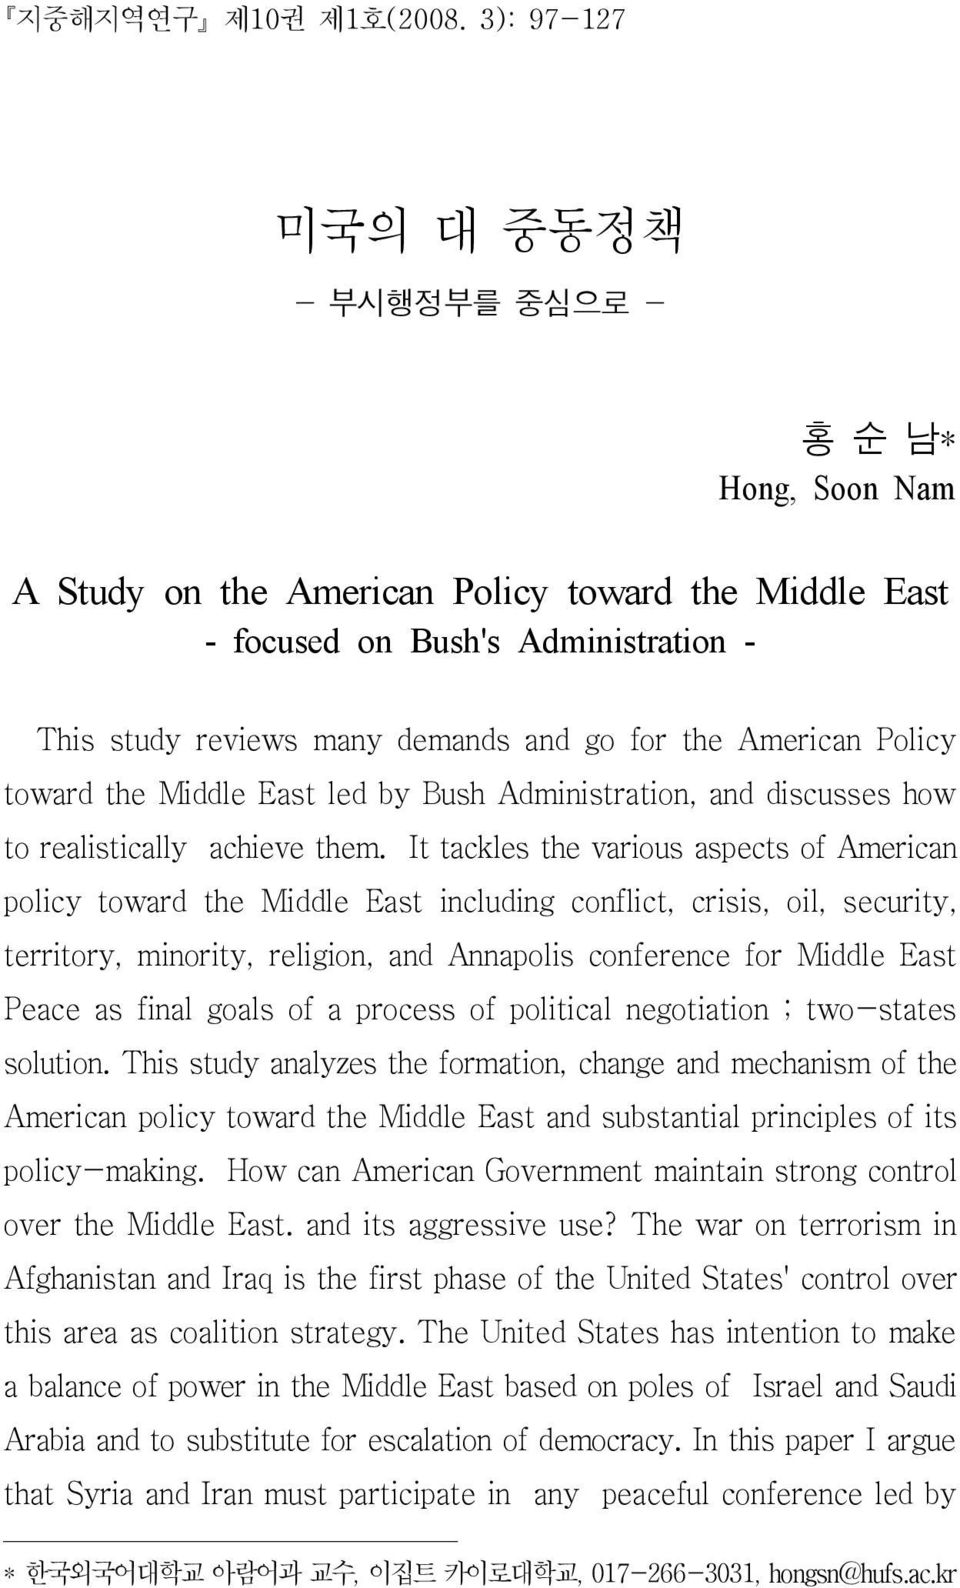 American Policy toward the Middle East led by Bush Administration, and discusses how to realistically achieve them.